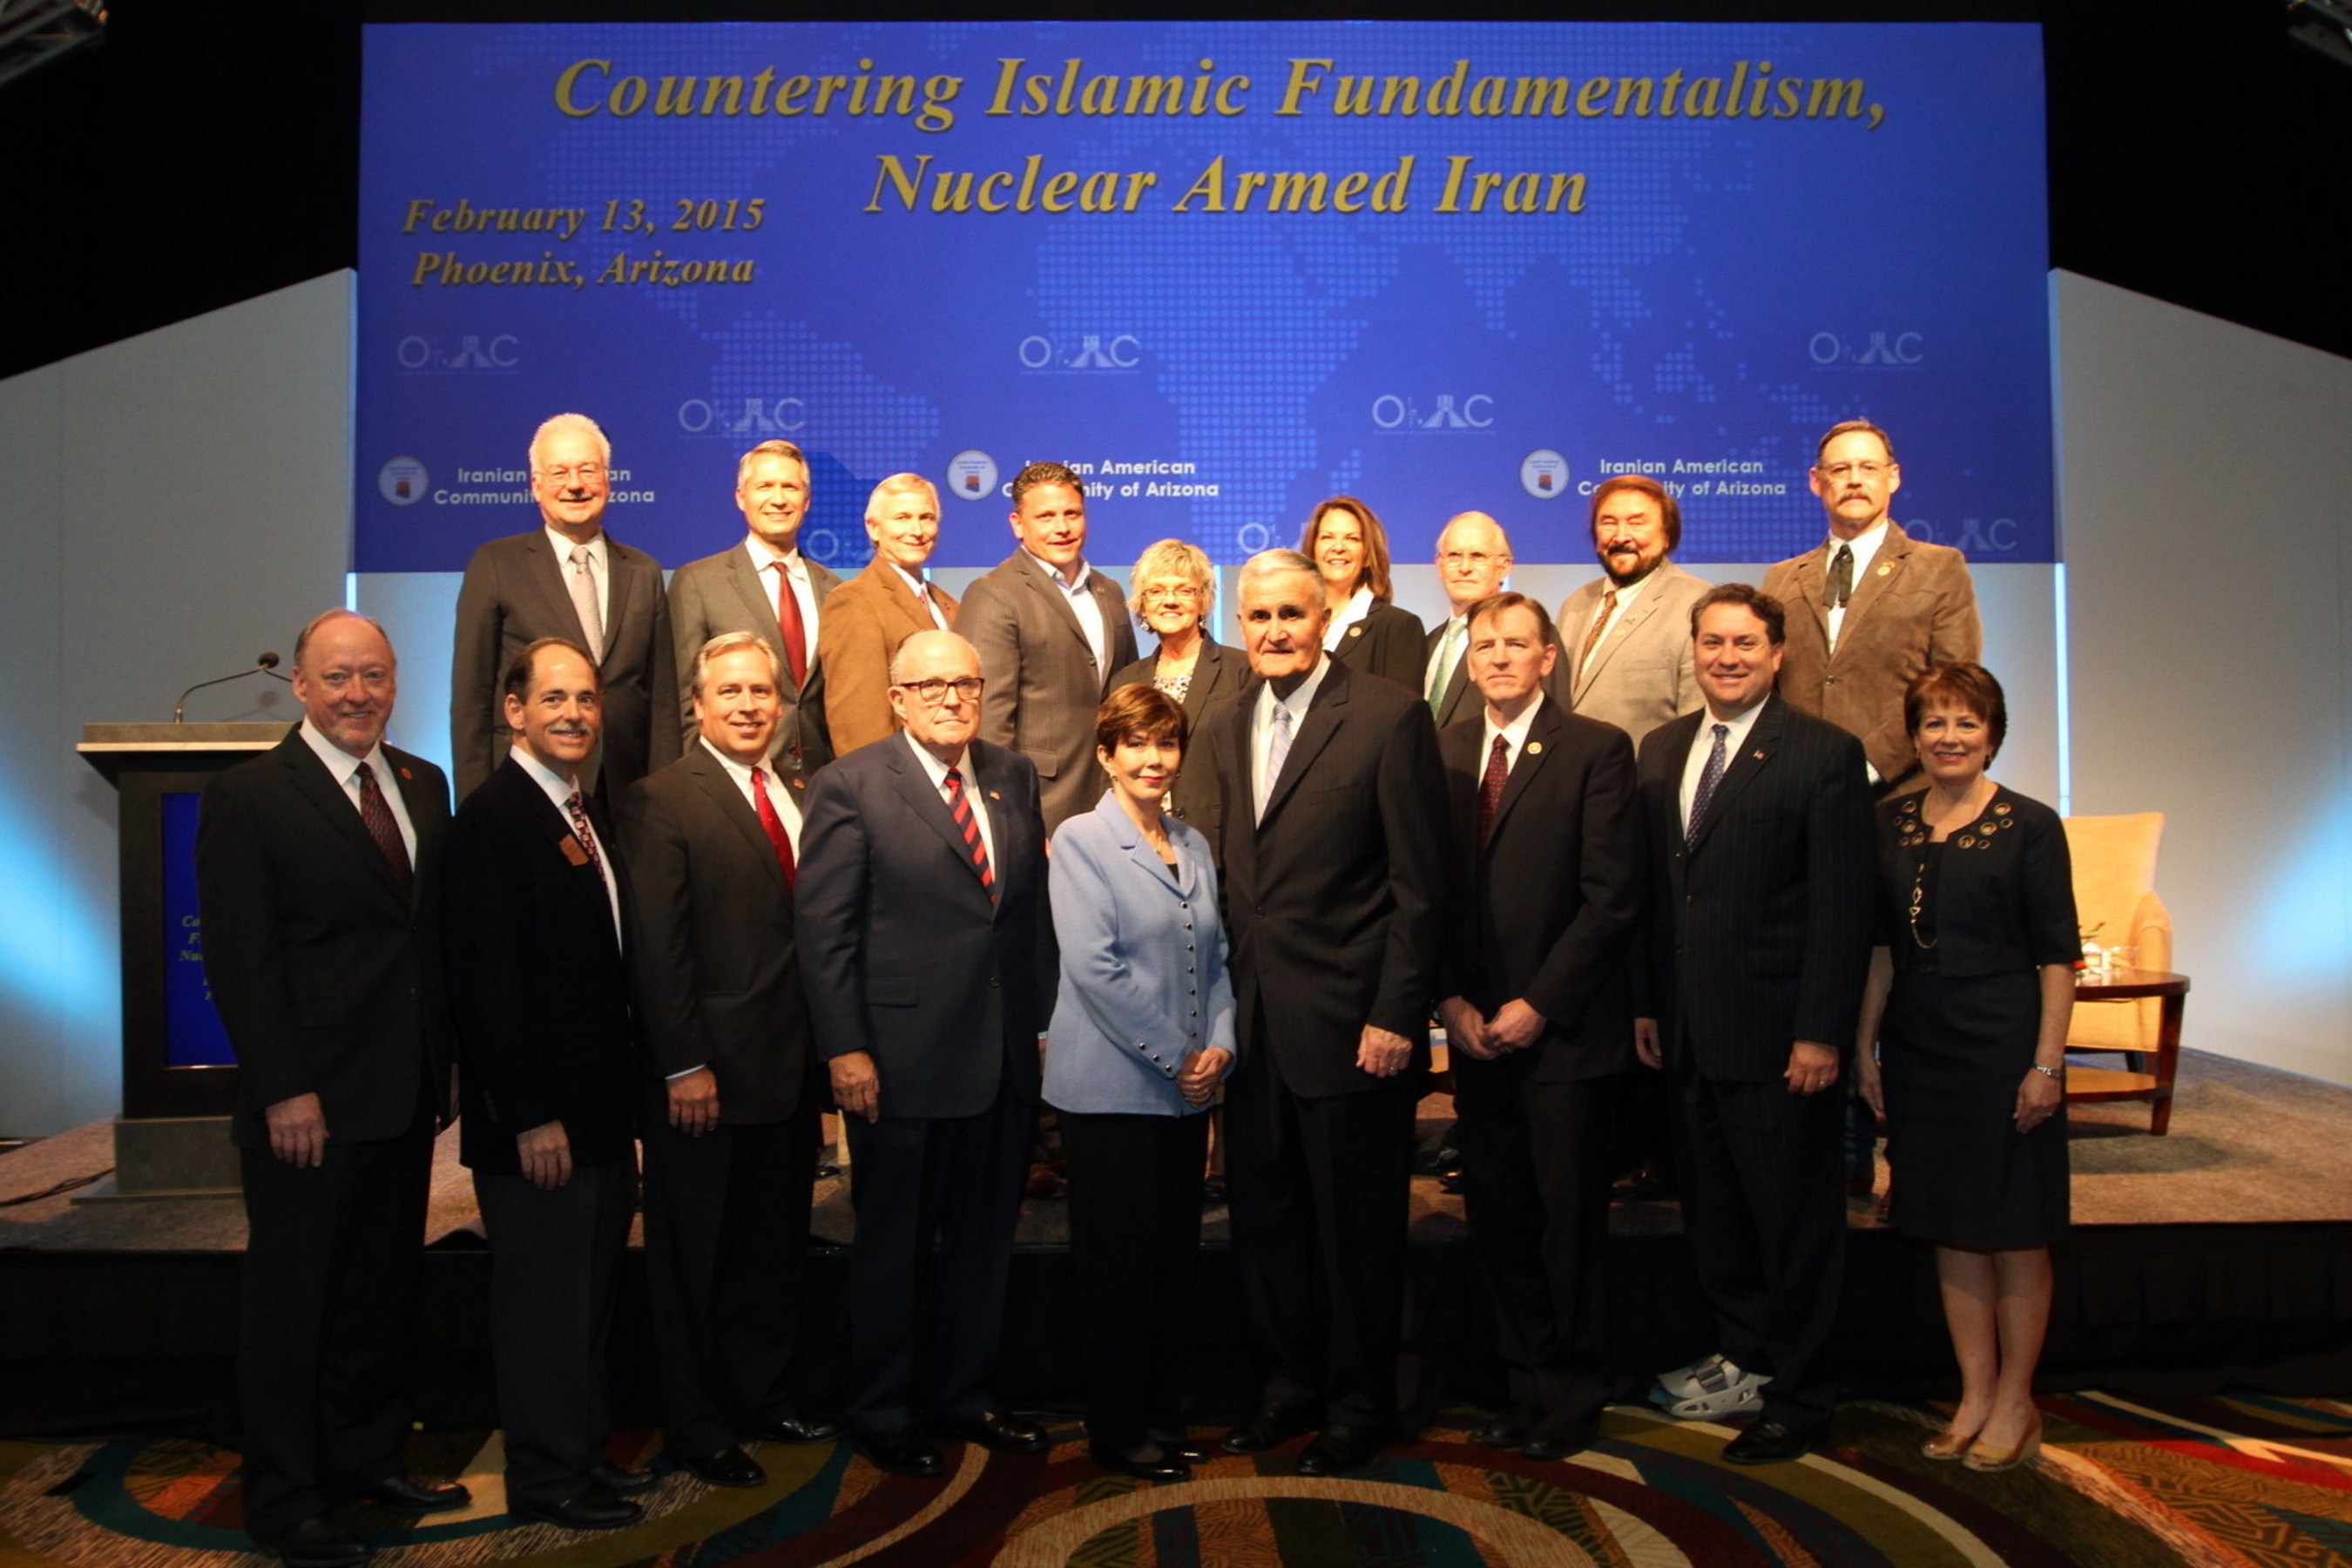 Mayor Rudy Giuliani, General Hugh Shelton and Linda Chavez joined Prominent Arizona officials to discuss "Countering Islamic Fundamentalism, a Nuclear-Armed Iran" on Feb. 13, 2015 in Phoenix, AZ.